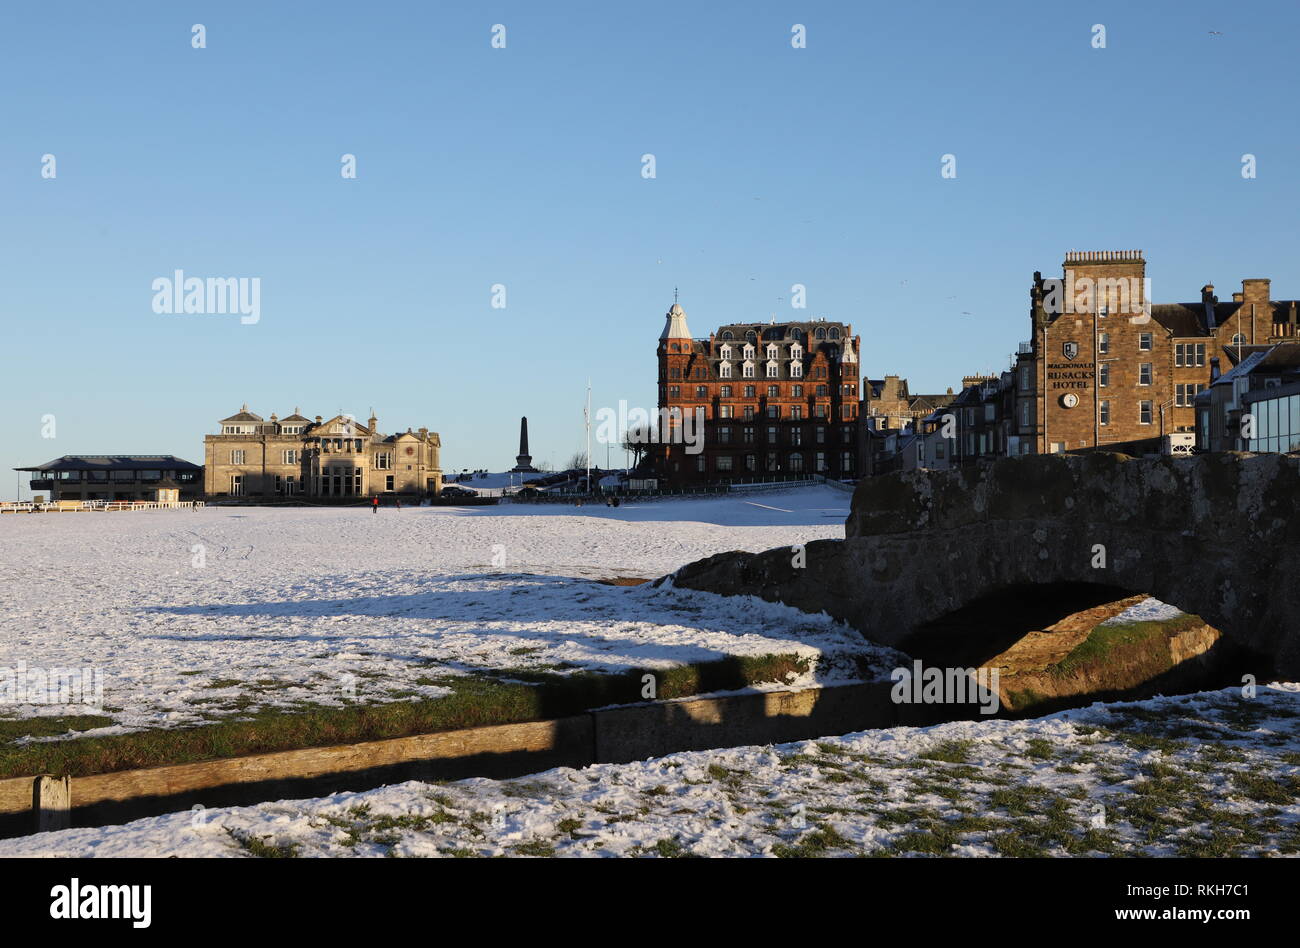 Swilken Bridge and Royal and Ancient Clubhouse with snow St Andrews Fife Scotland   February 2019 Stock Photo